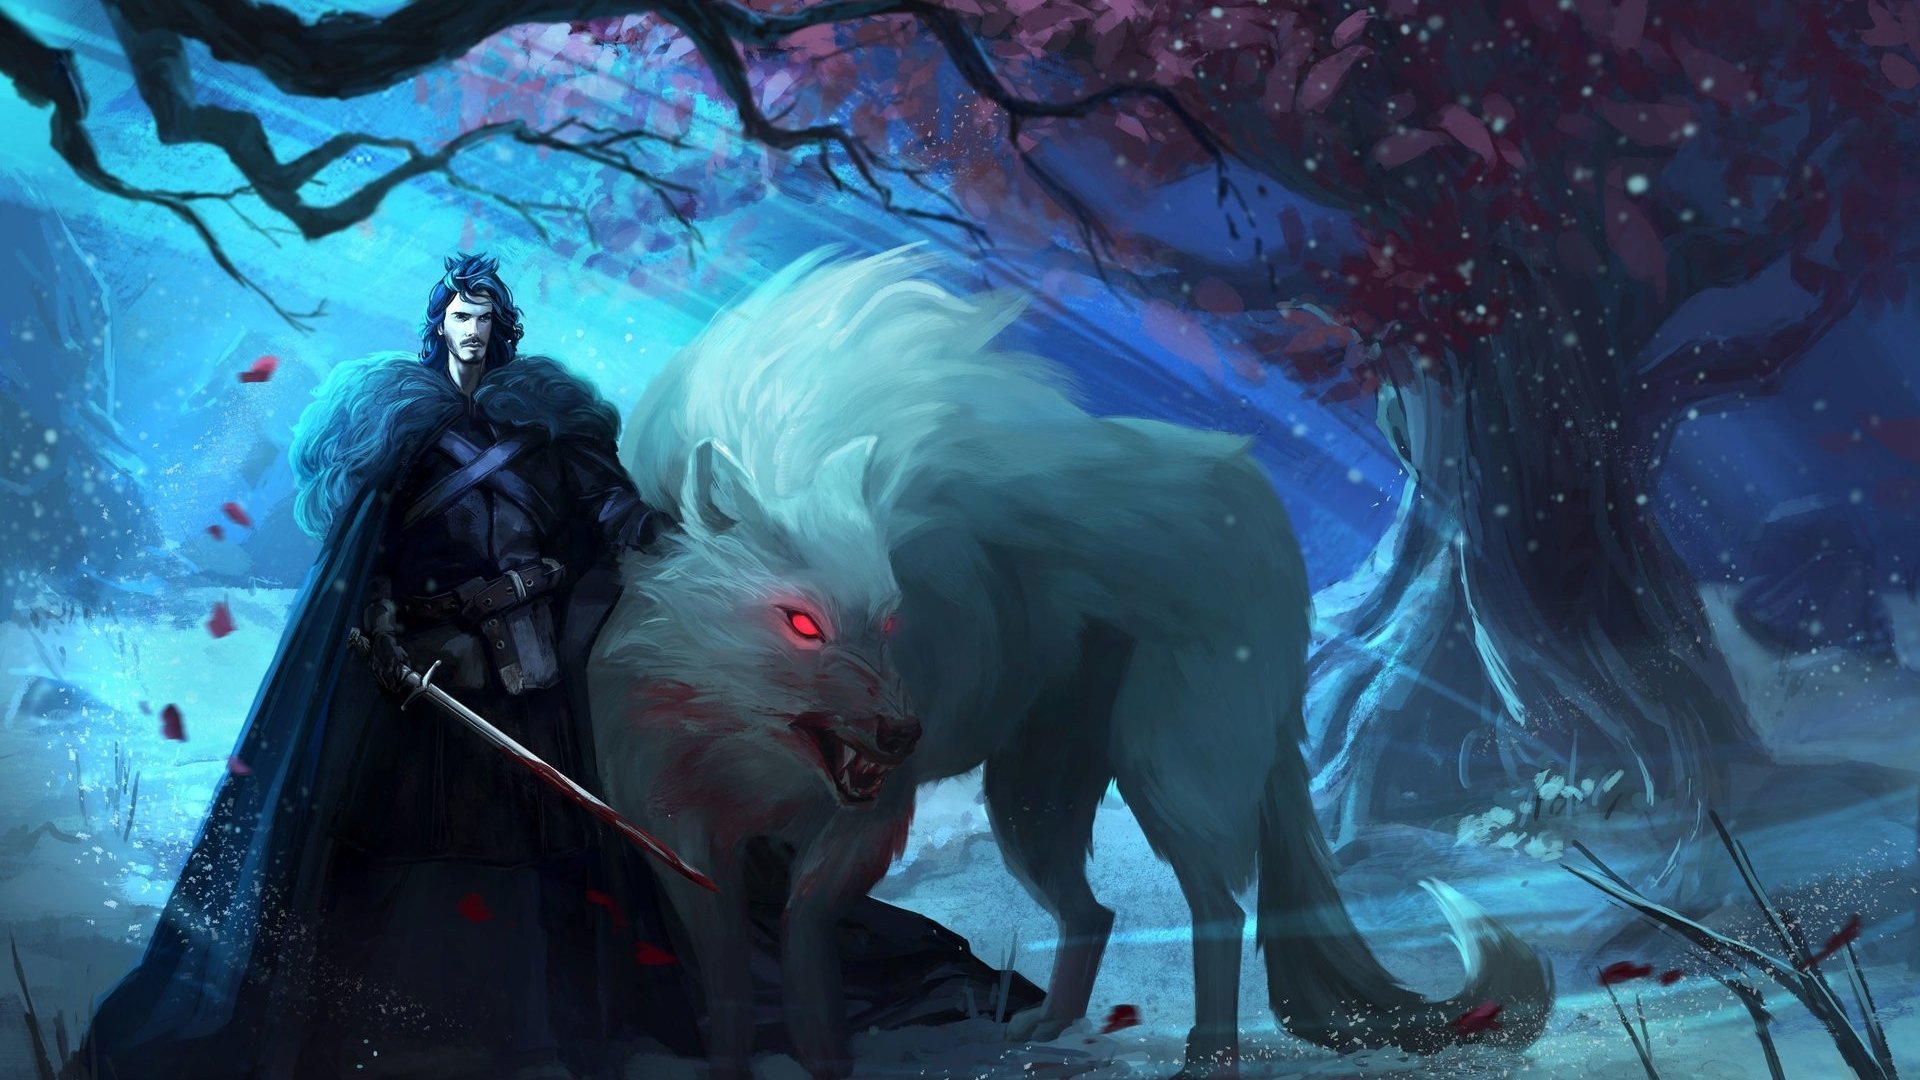 Jon Snow And Ghost Wallpapers 1080p On Hd Wallpaper Song Of Ice And Fire 19x1080 Wallpaper Teahub Io